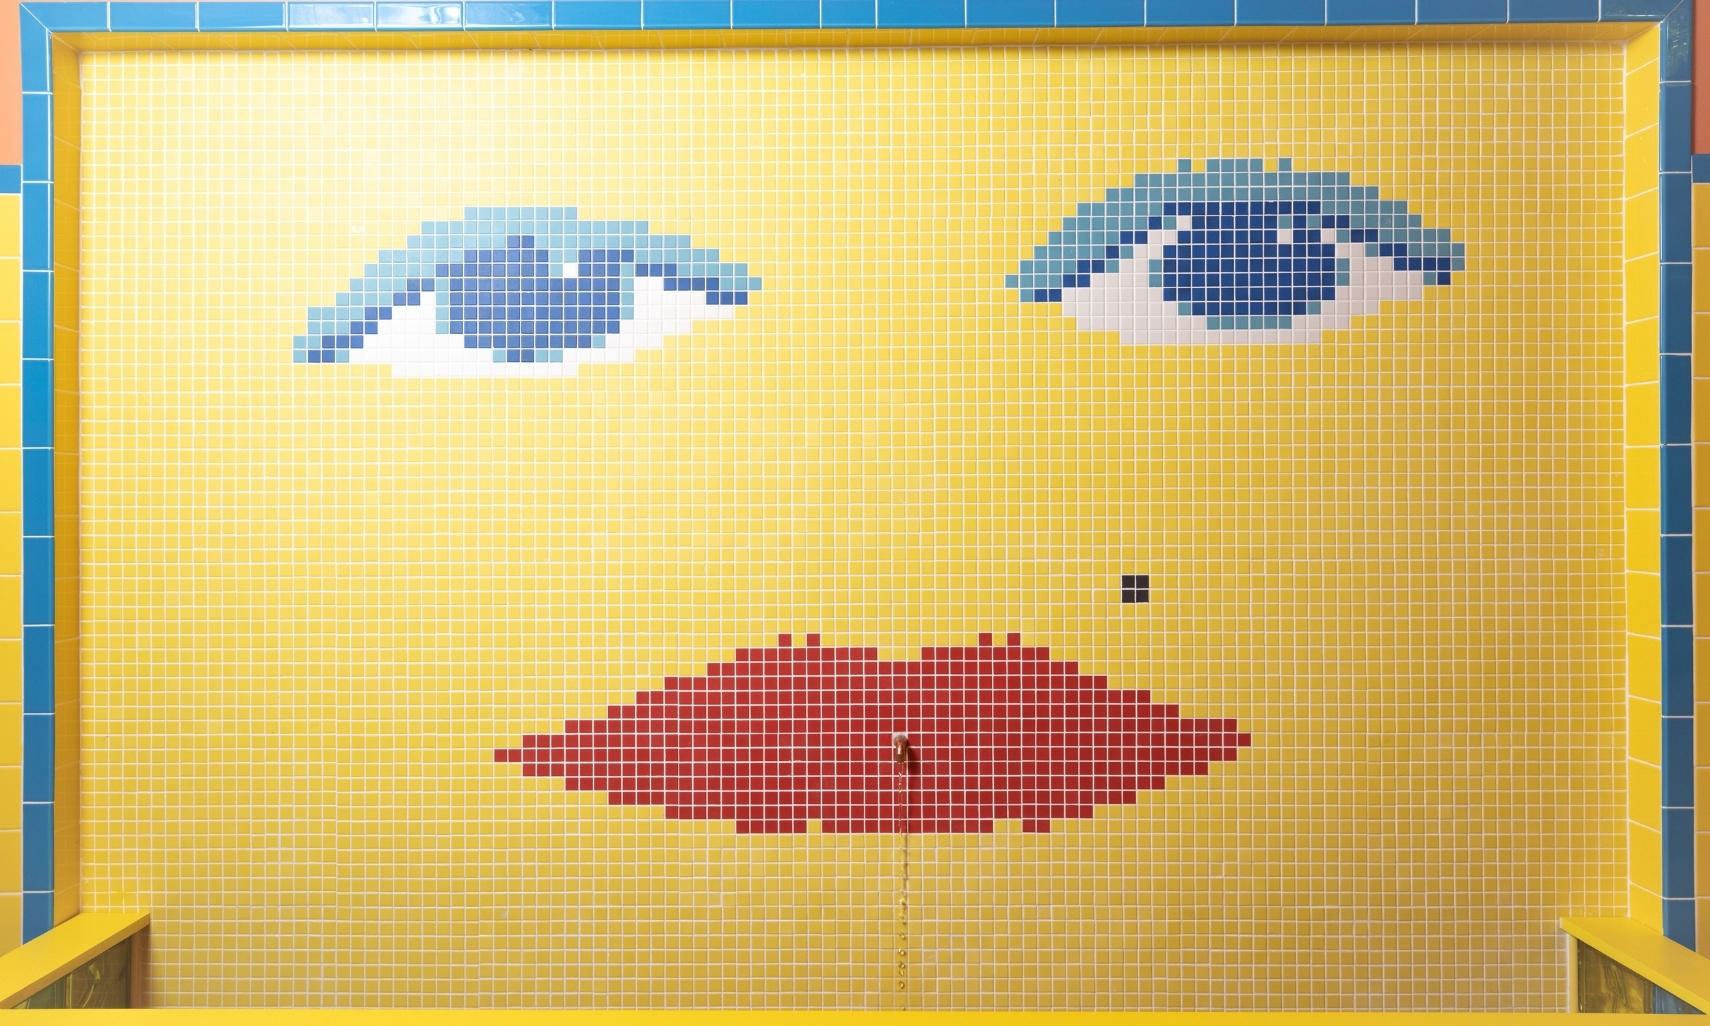 Wall fountain with yellow, blue, white, and red mosaic wall tile that looks like a woman's face.